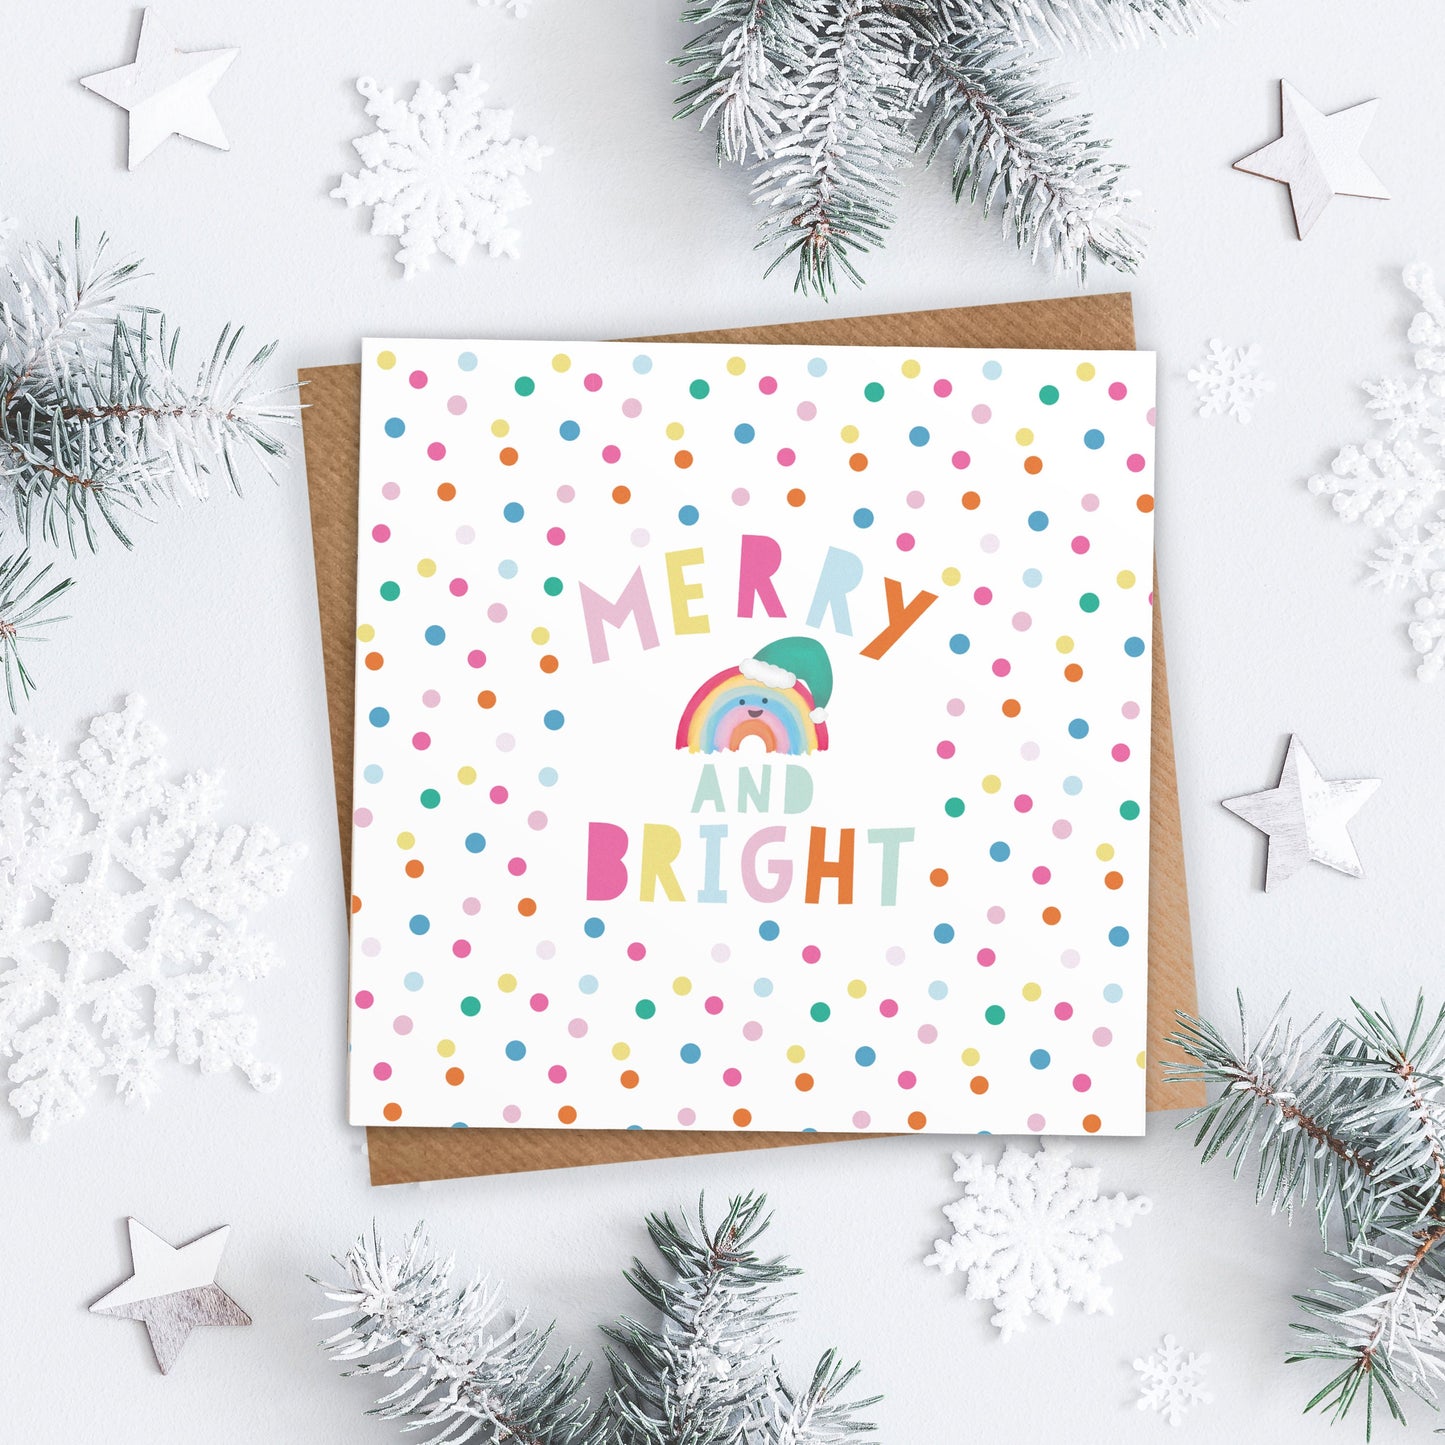 Merry And Bright Rainbow Christmas Card. Personalised Christmas Card. Festive Rainbow Card. Cute Christmas Cards. Send Direct Option.